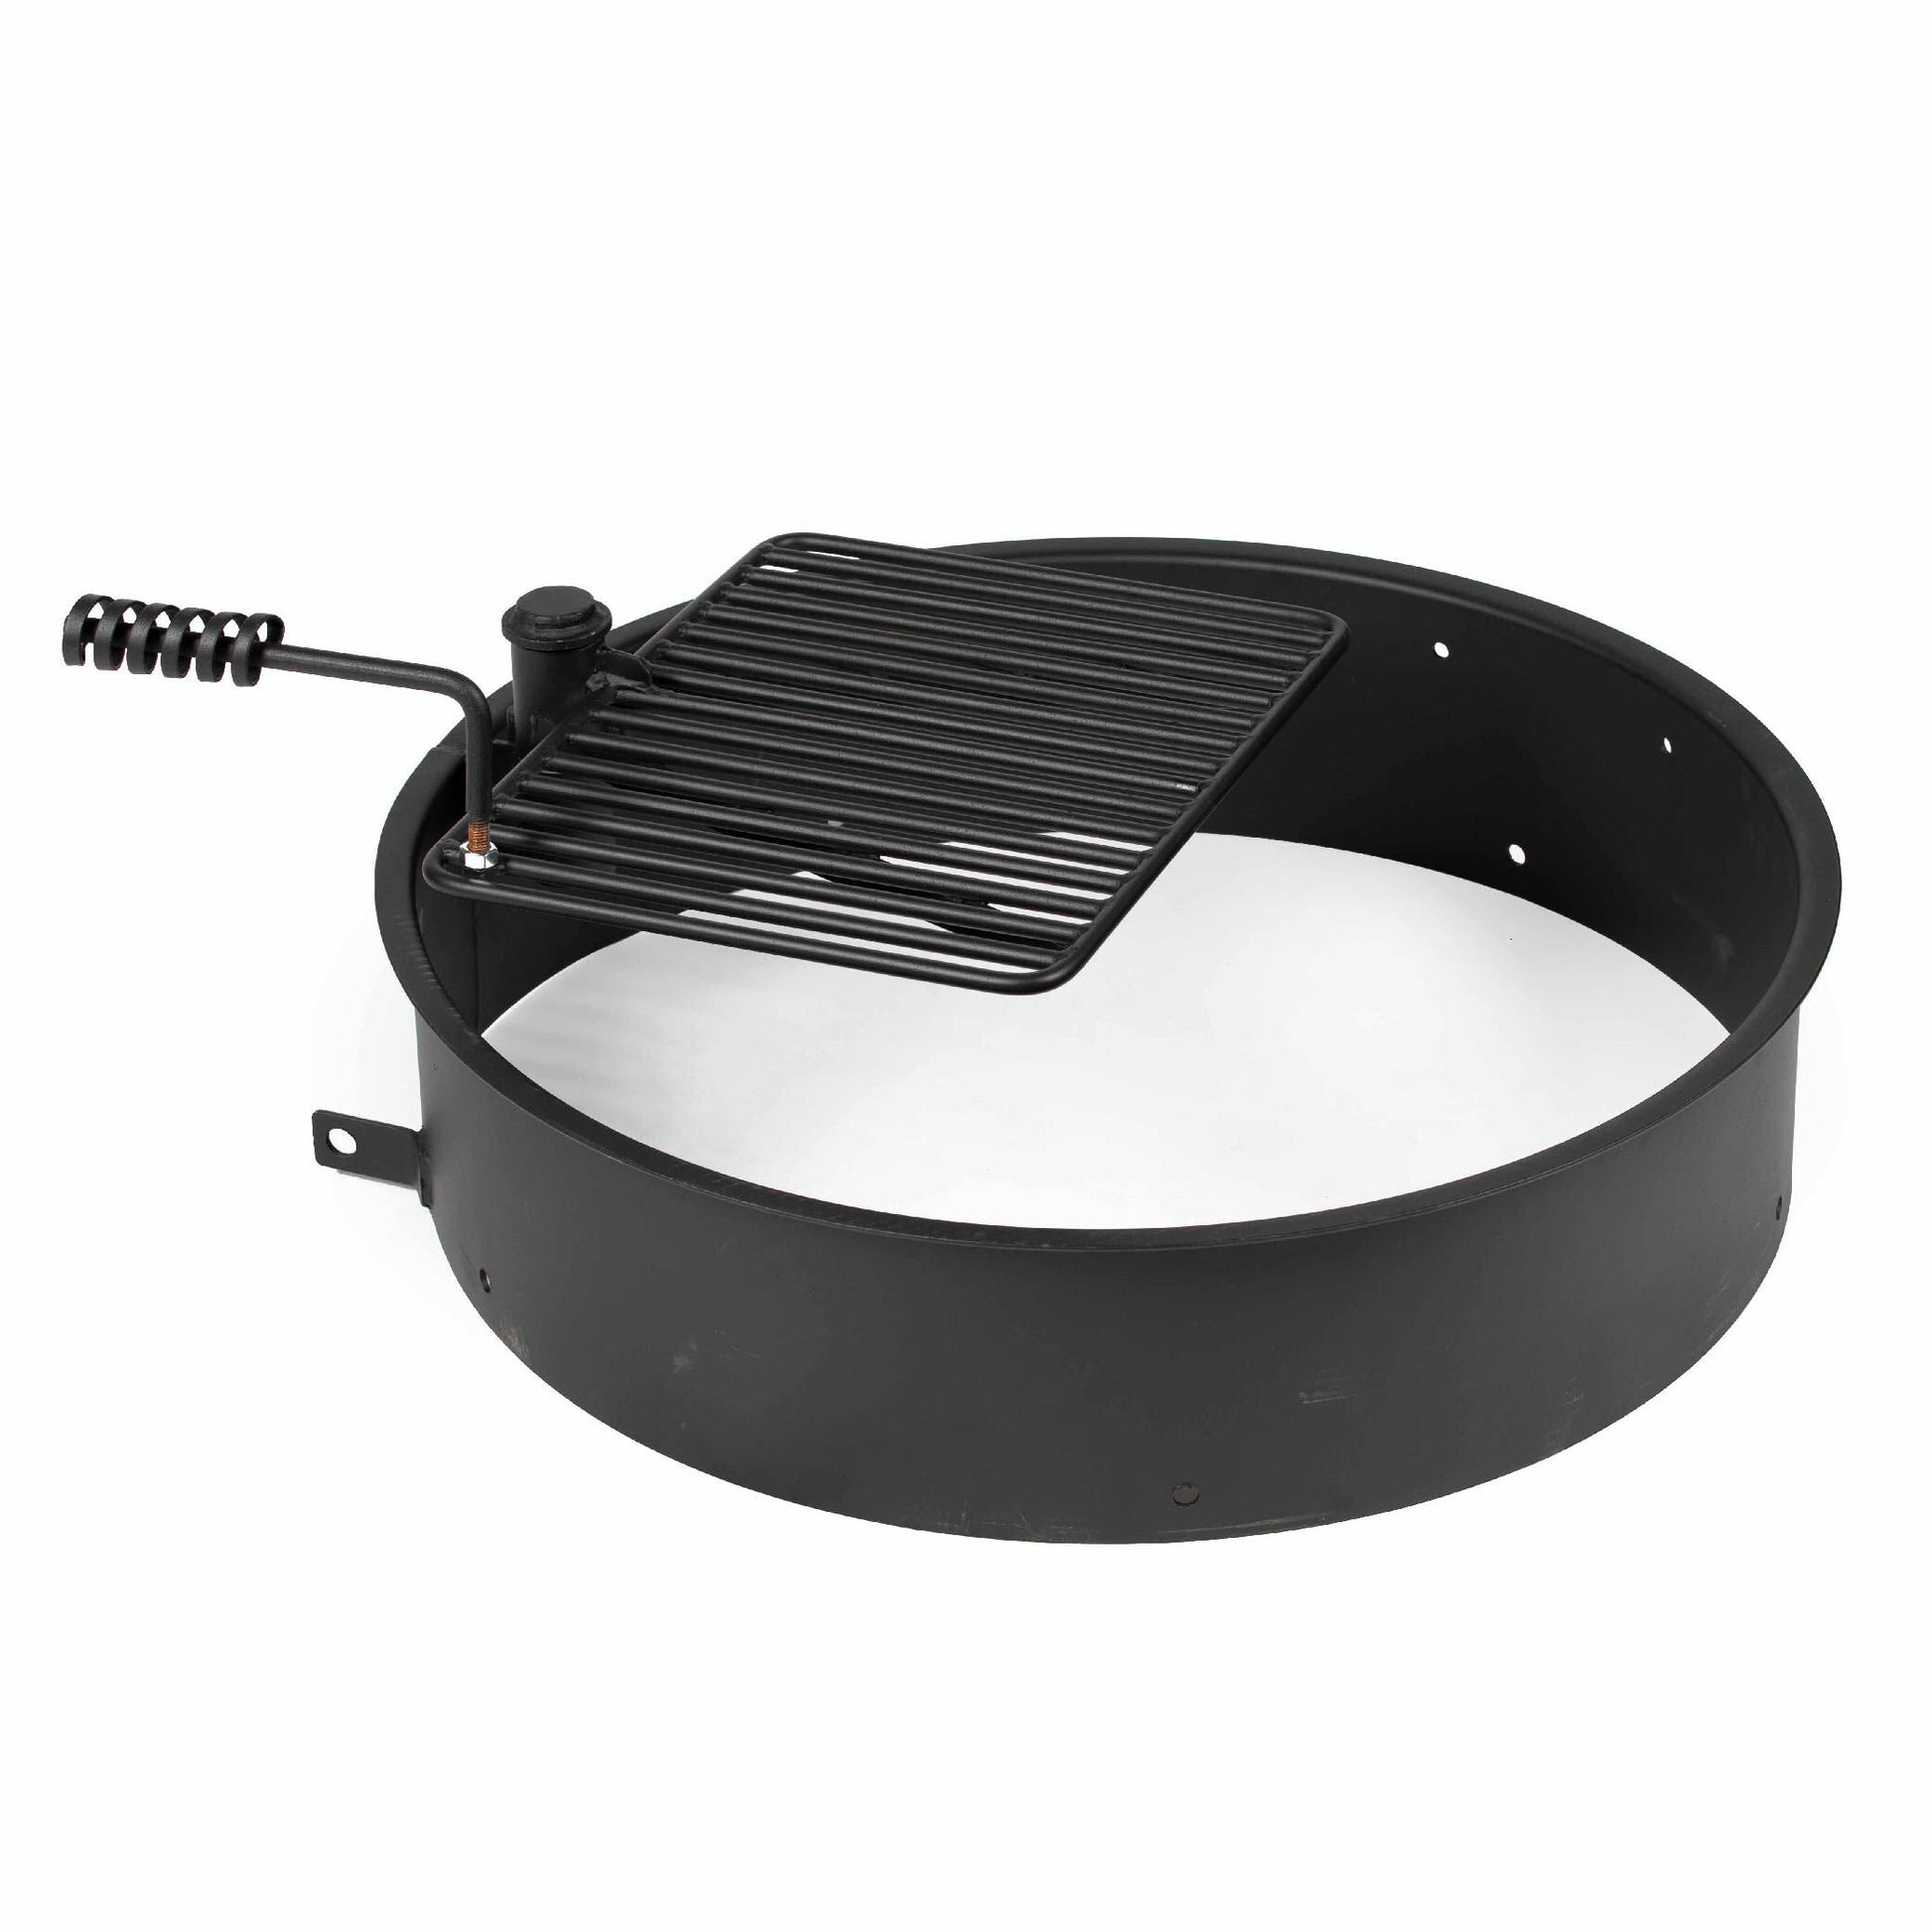 Steel Camp Fire Ring & Outdoor Cooking Grate - Fire Ring Size: 32" | 32"